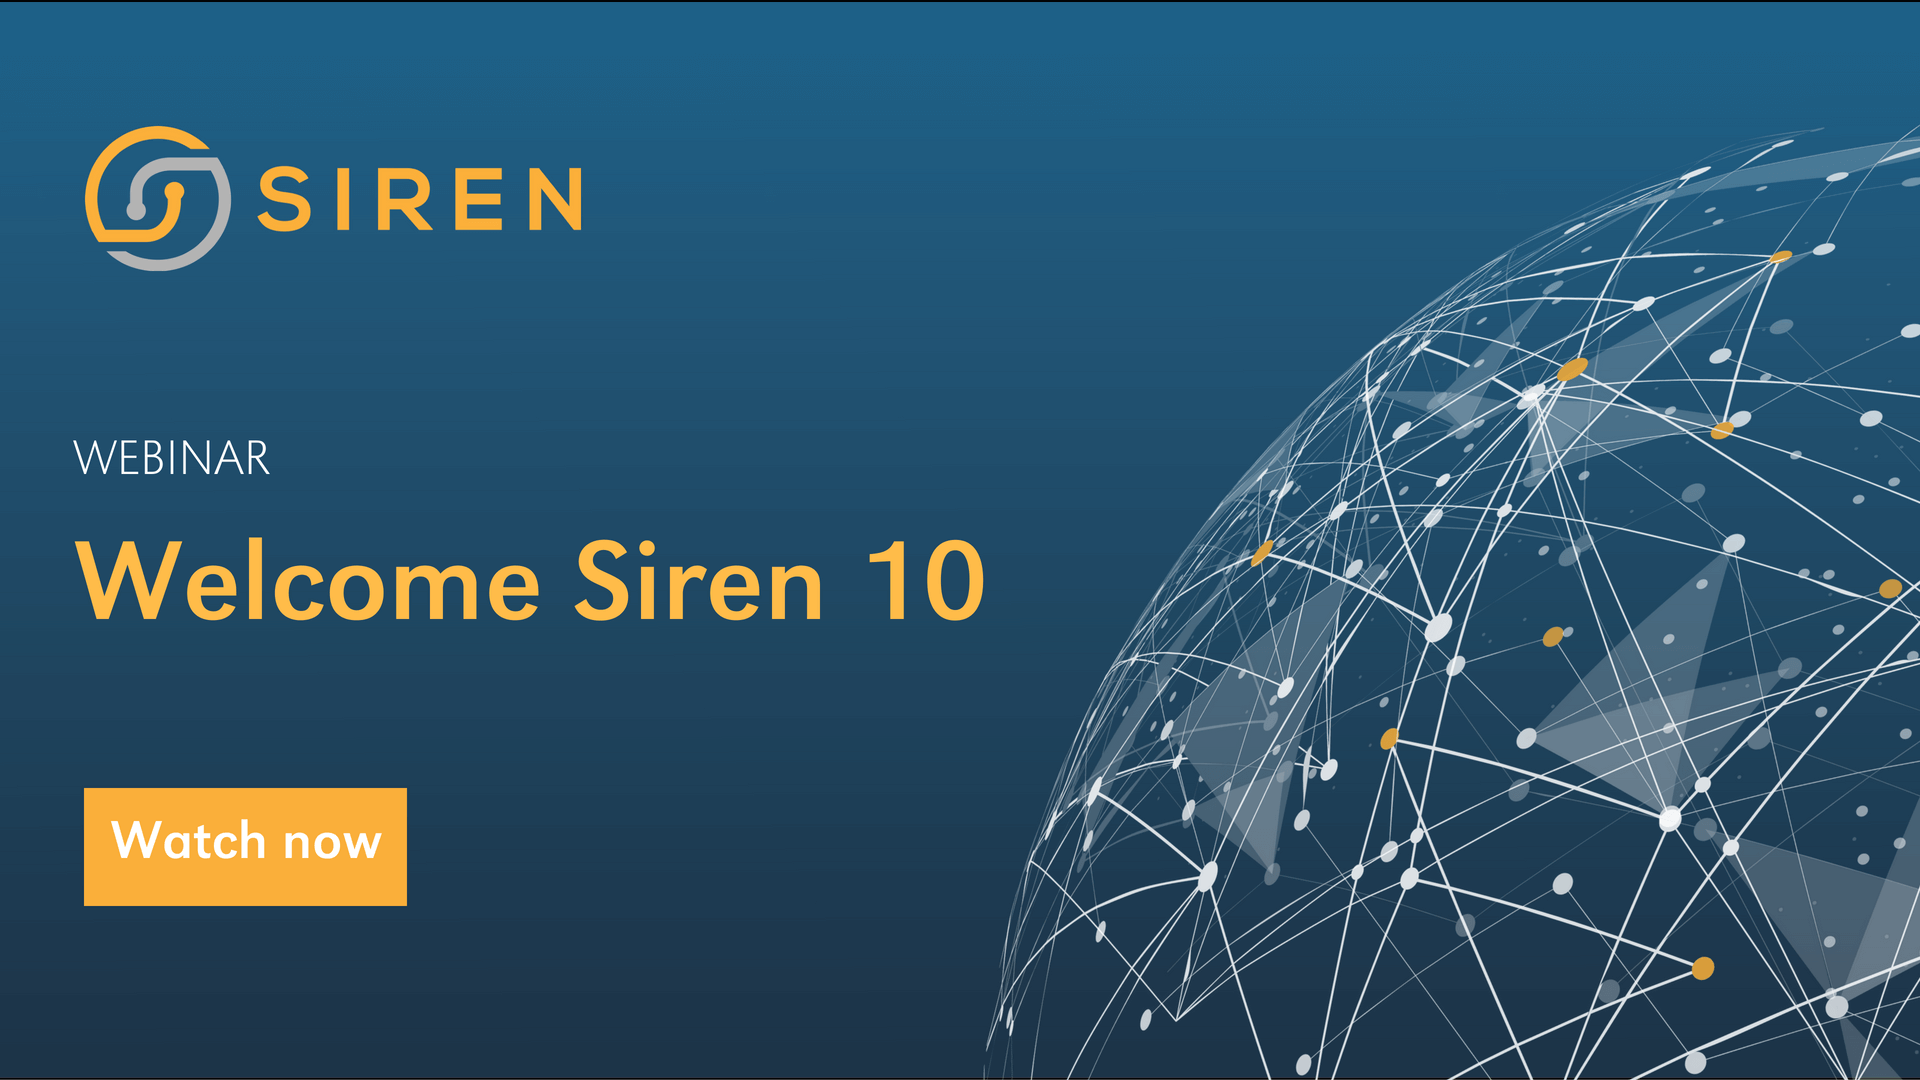 Siren 10 on demand webinar is here (distributed joins, direct SQL federation and much more)